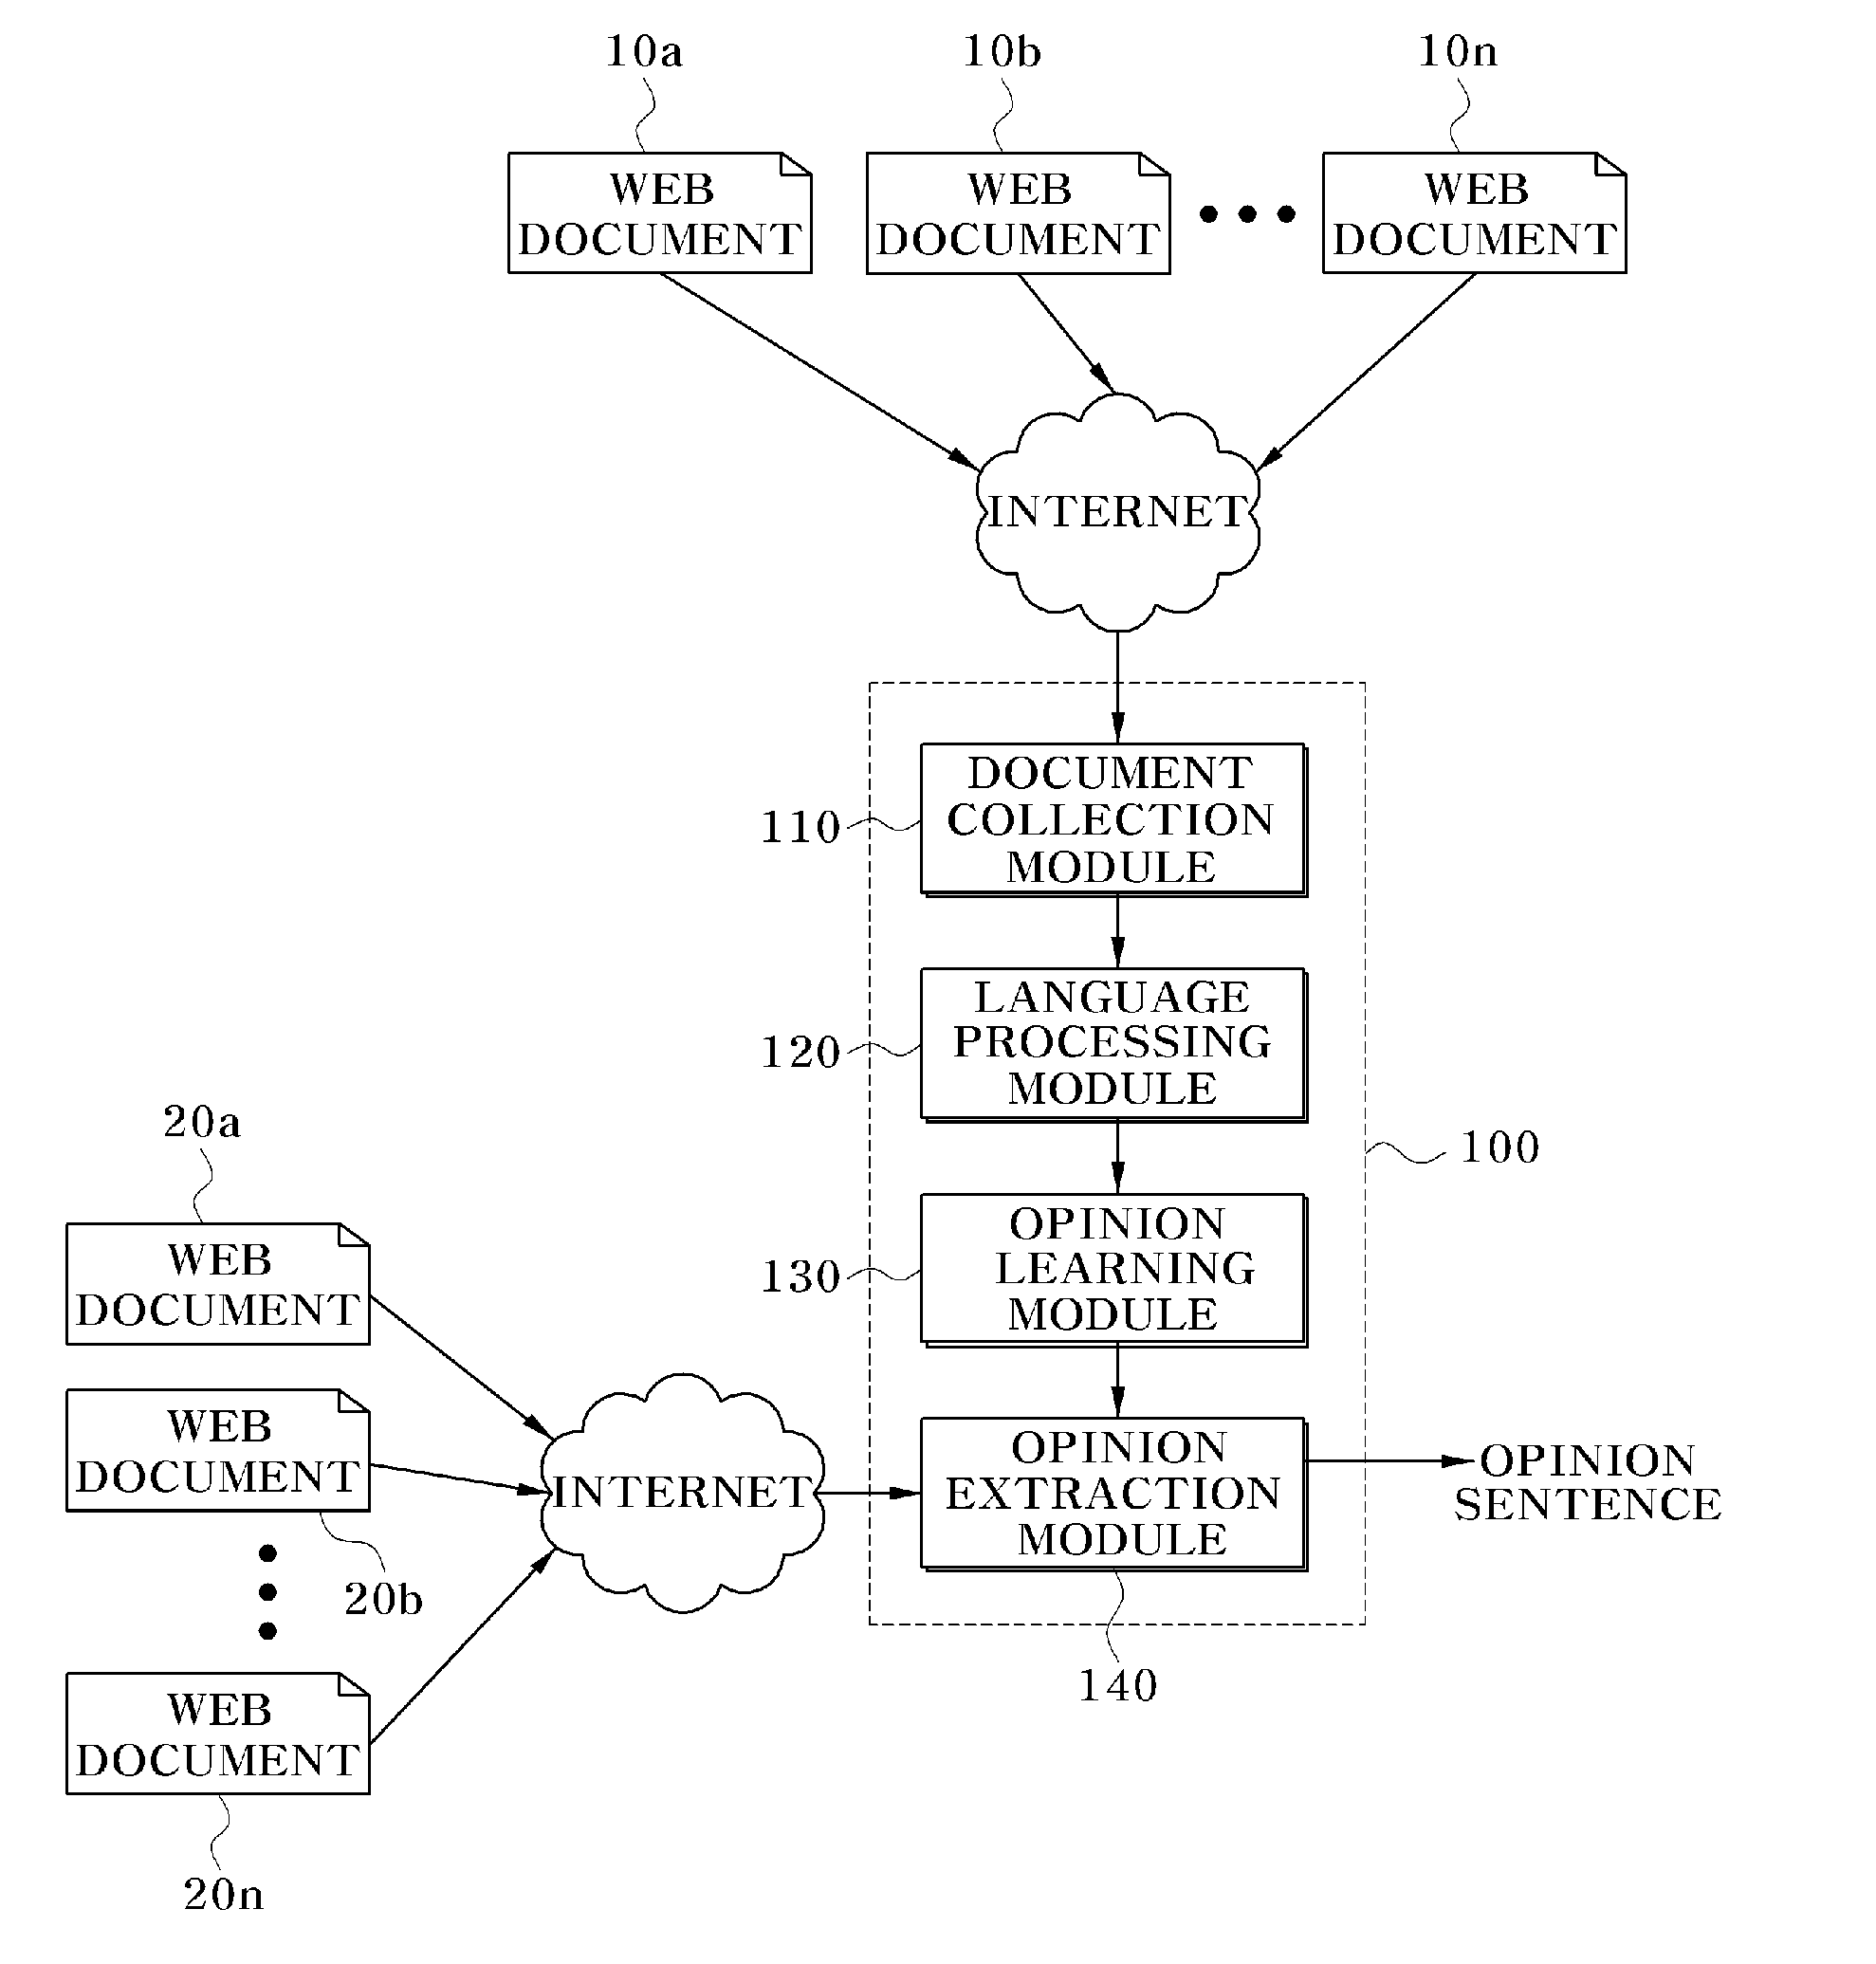 Apparatus and method for extracting and analyzing opinion in web document